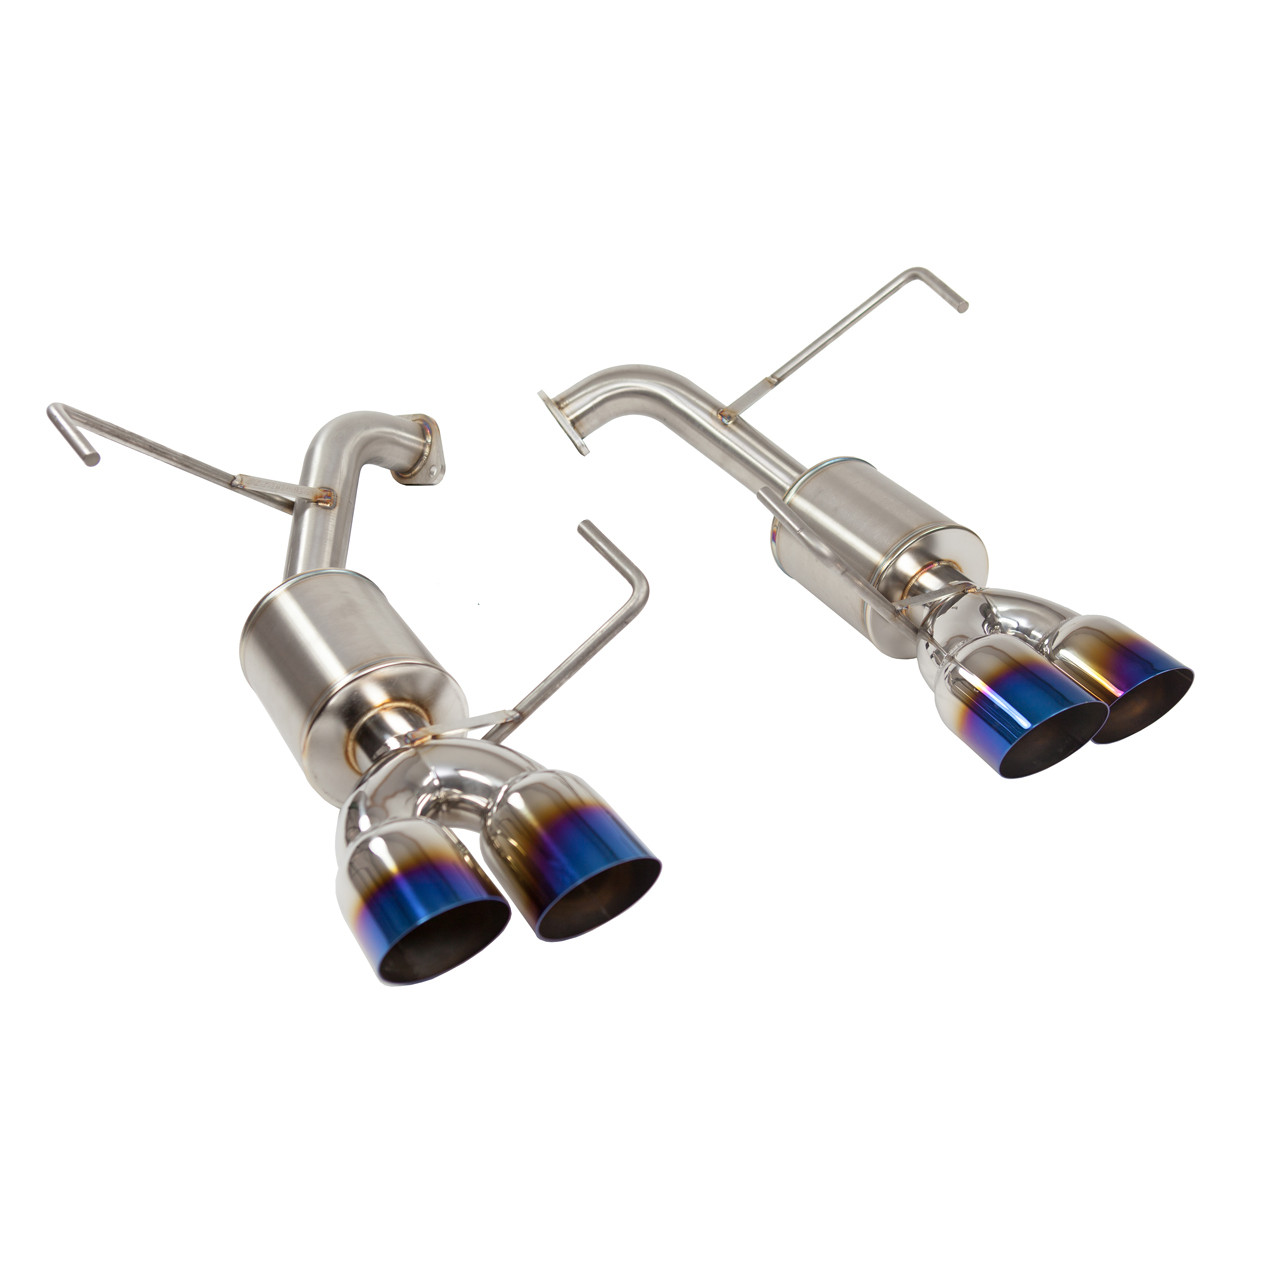 Nameless Performance Catback Exhaust with 5 inch muffler and 3.5 inch neochrome single wall exhaust tips